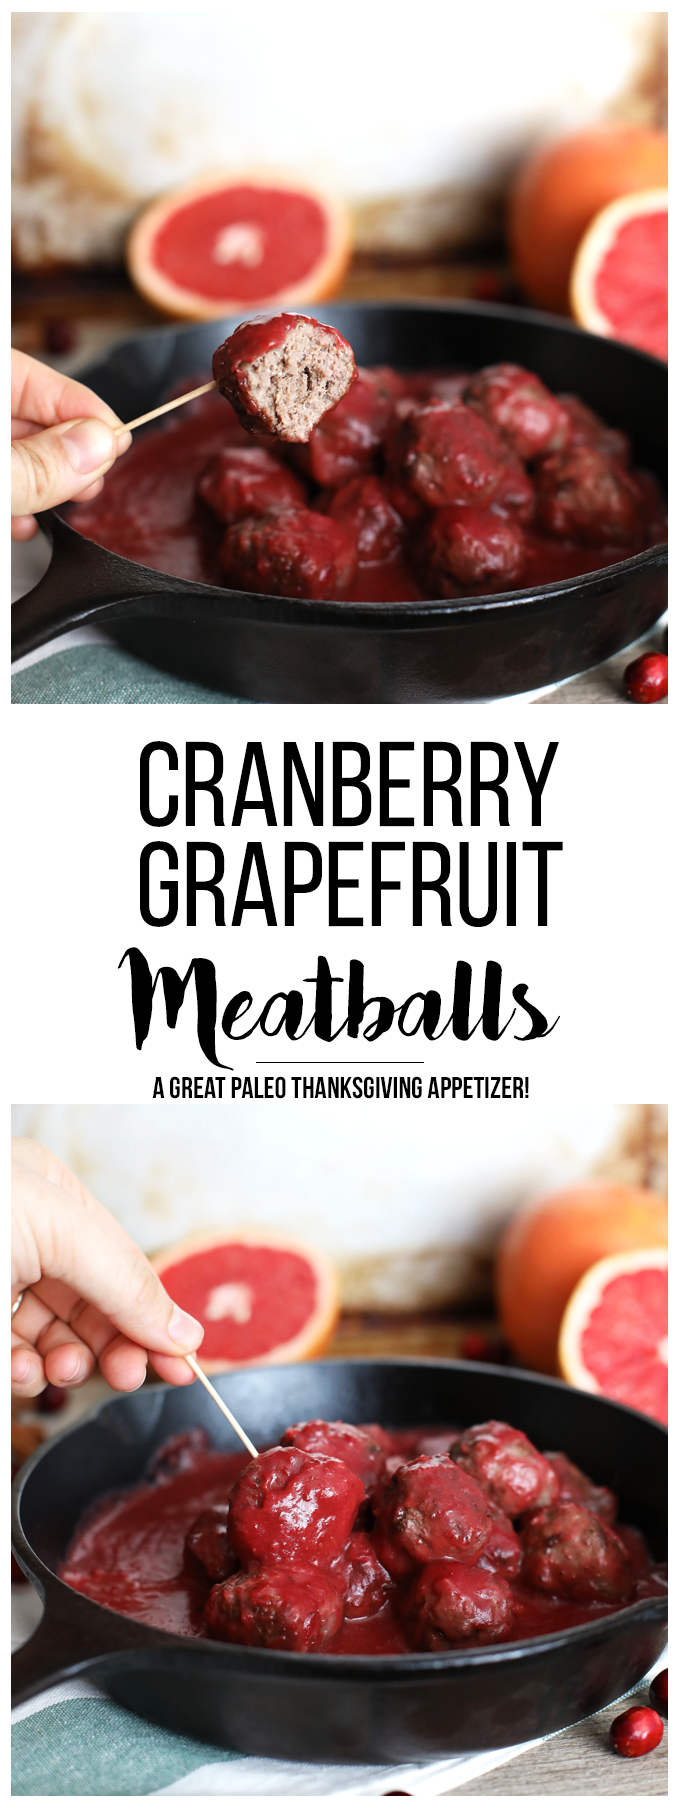 These Cranberry Grapefruit Meatballs are the perfect holiday appetizer for either thanksgiving or Christmas!